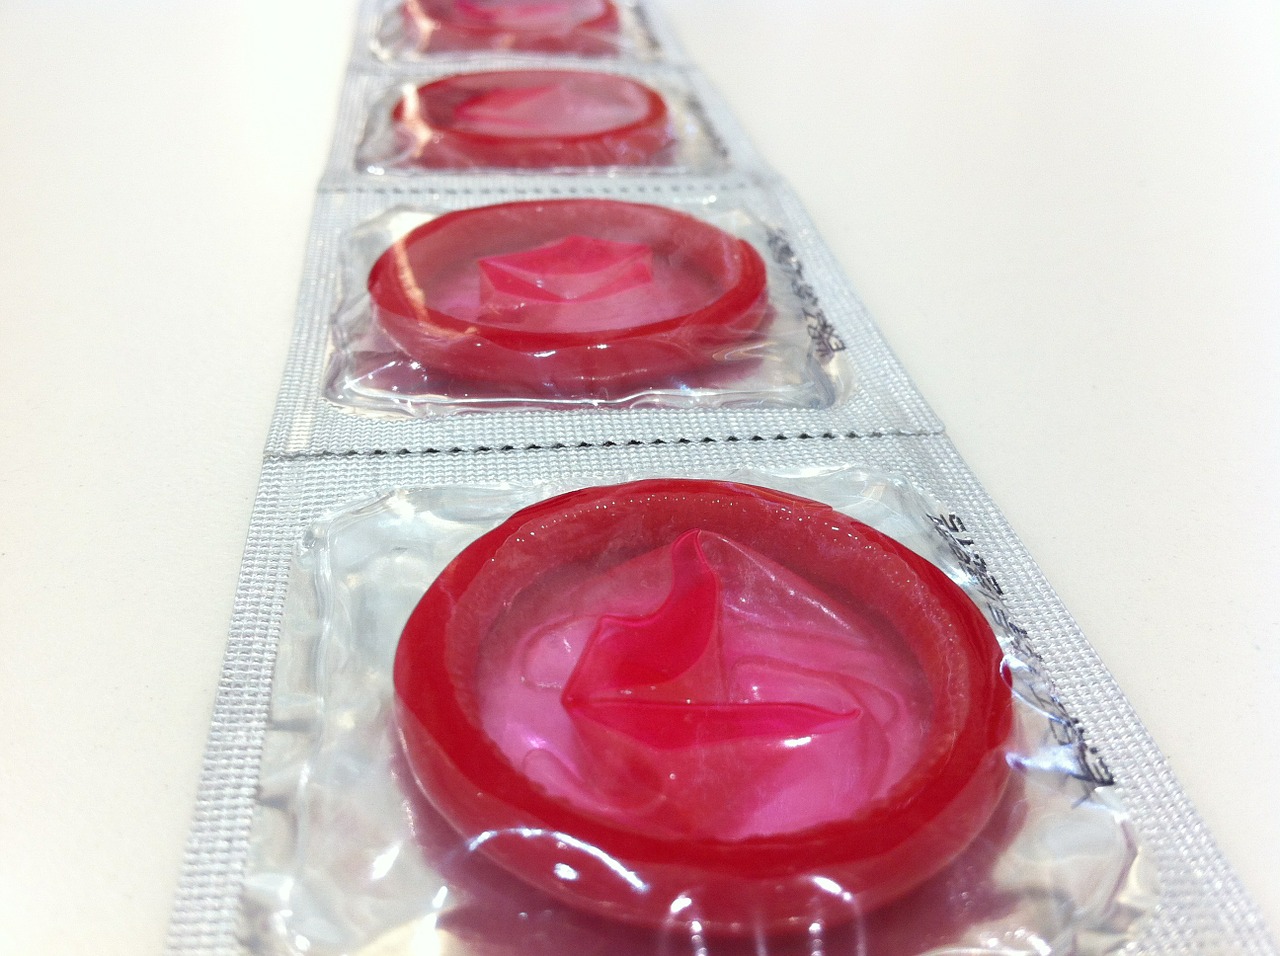 Condom Sales Plummet During Isolation Due To Lack Of People Banging Mumslounge